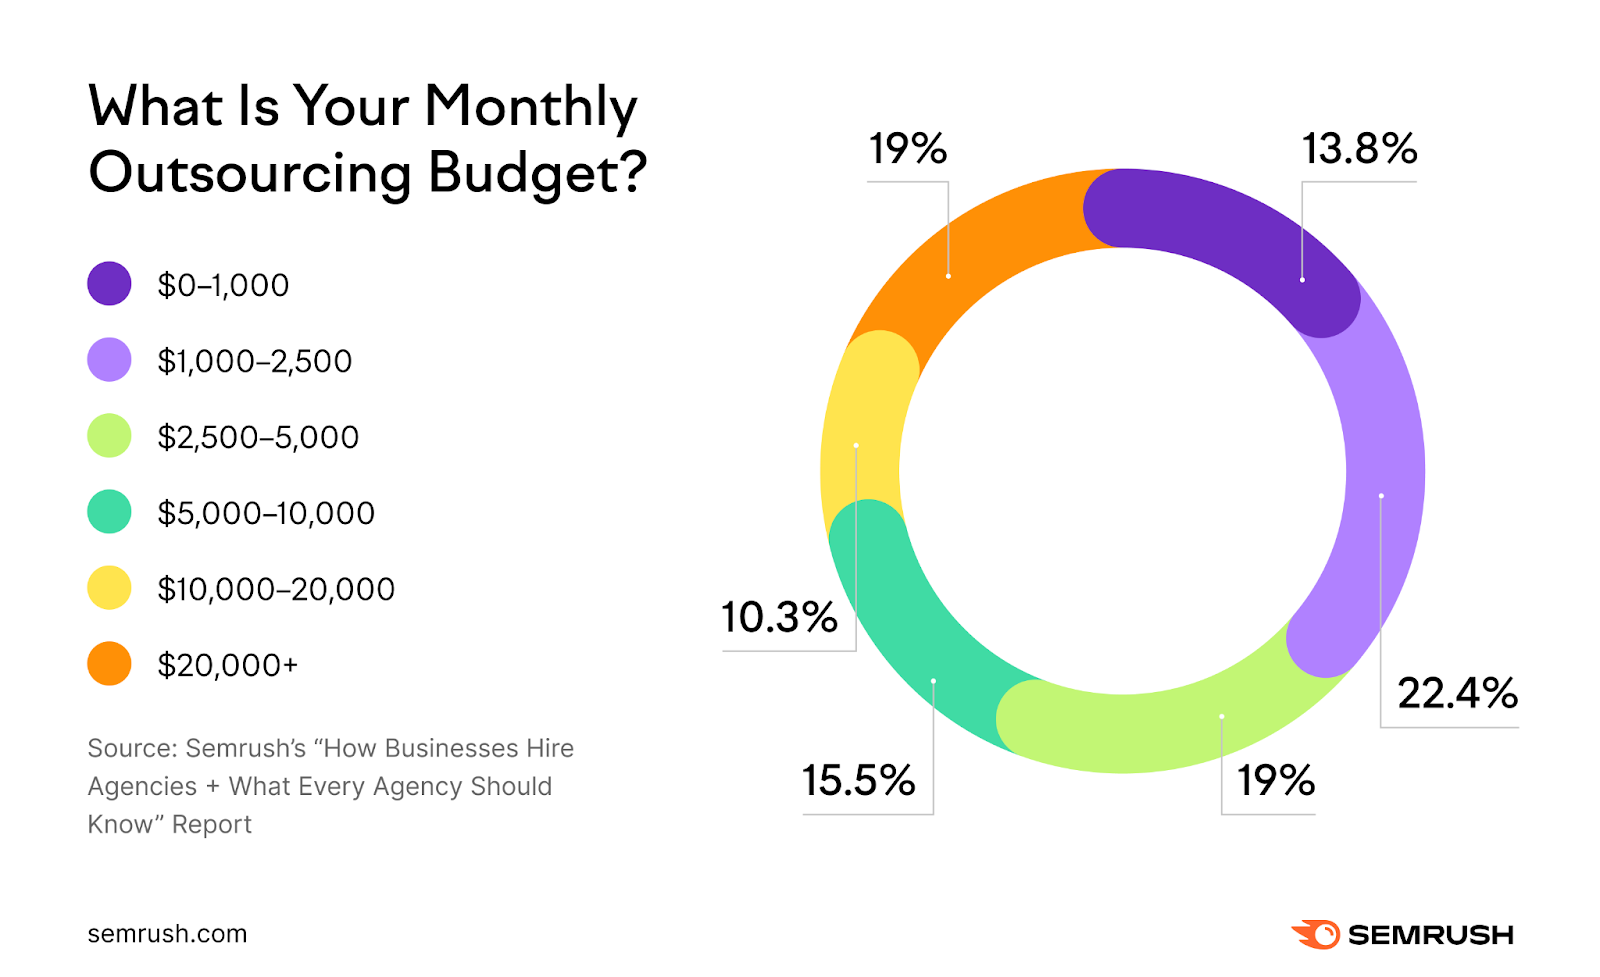 An infographic showing the results for "What is your monthly outsourcing budget?" question from the study